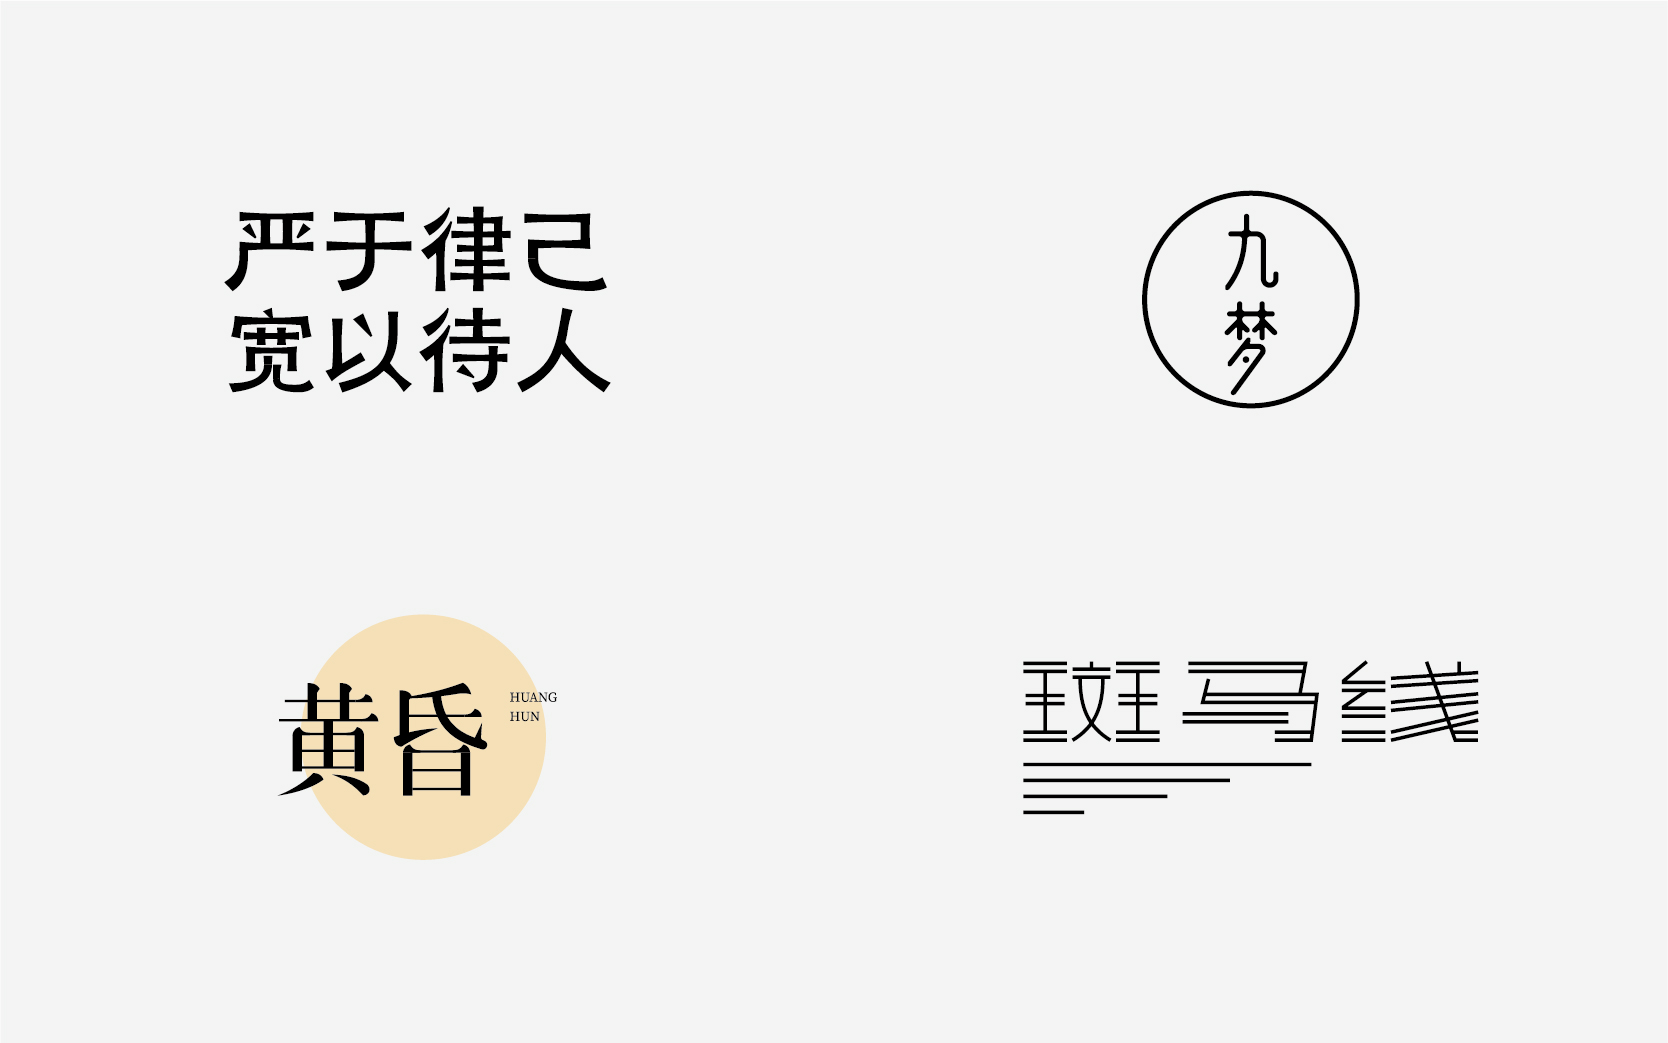 11P Collection of the latest Chinese font design schemes in 2021 #.27